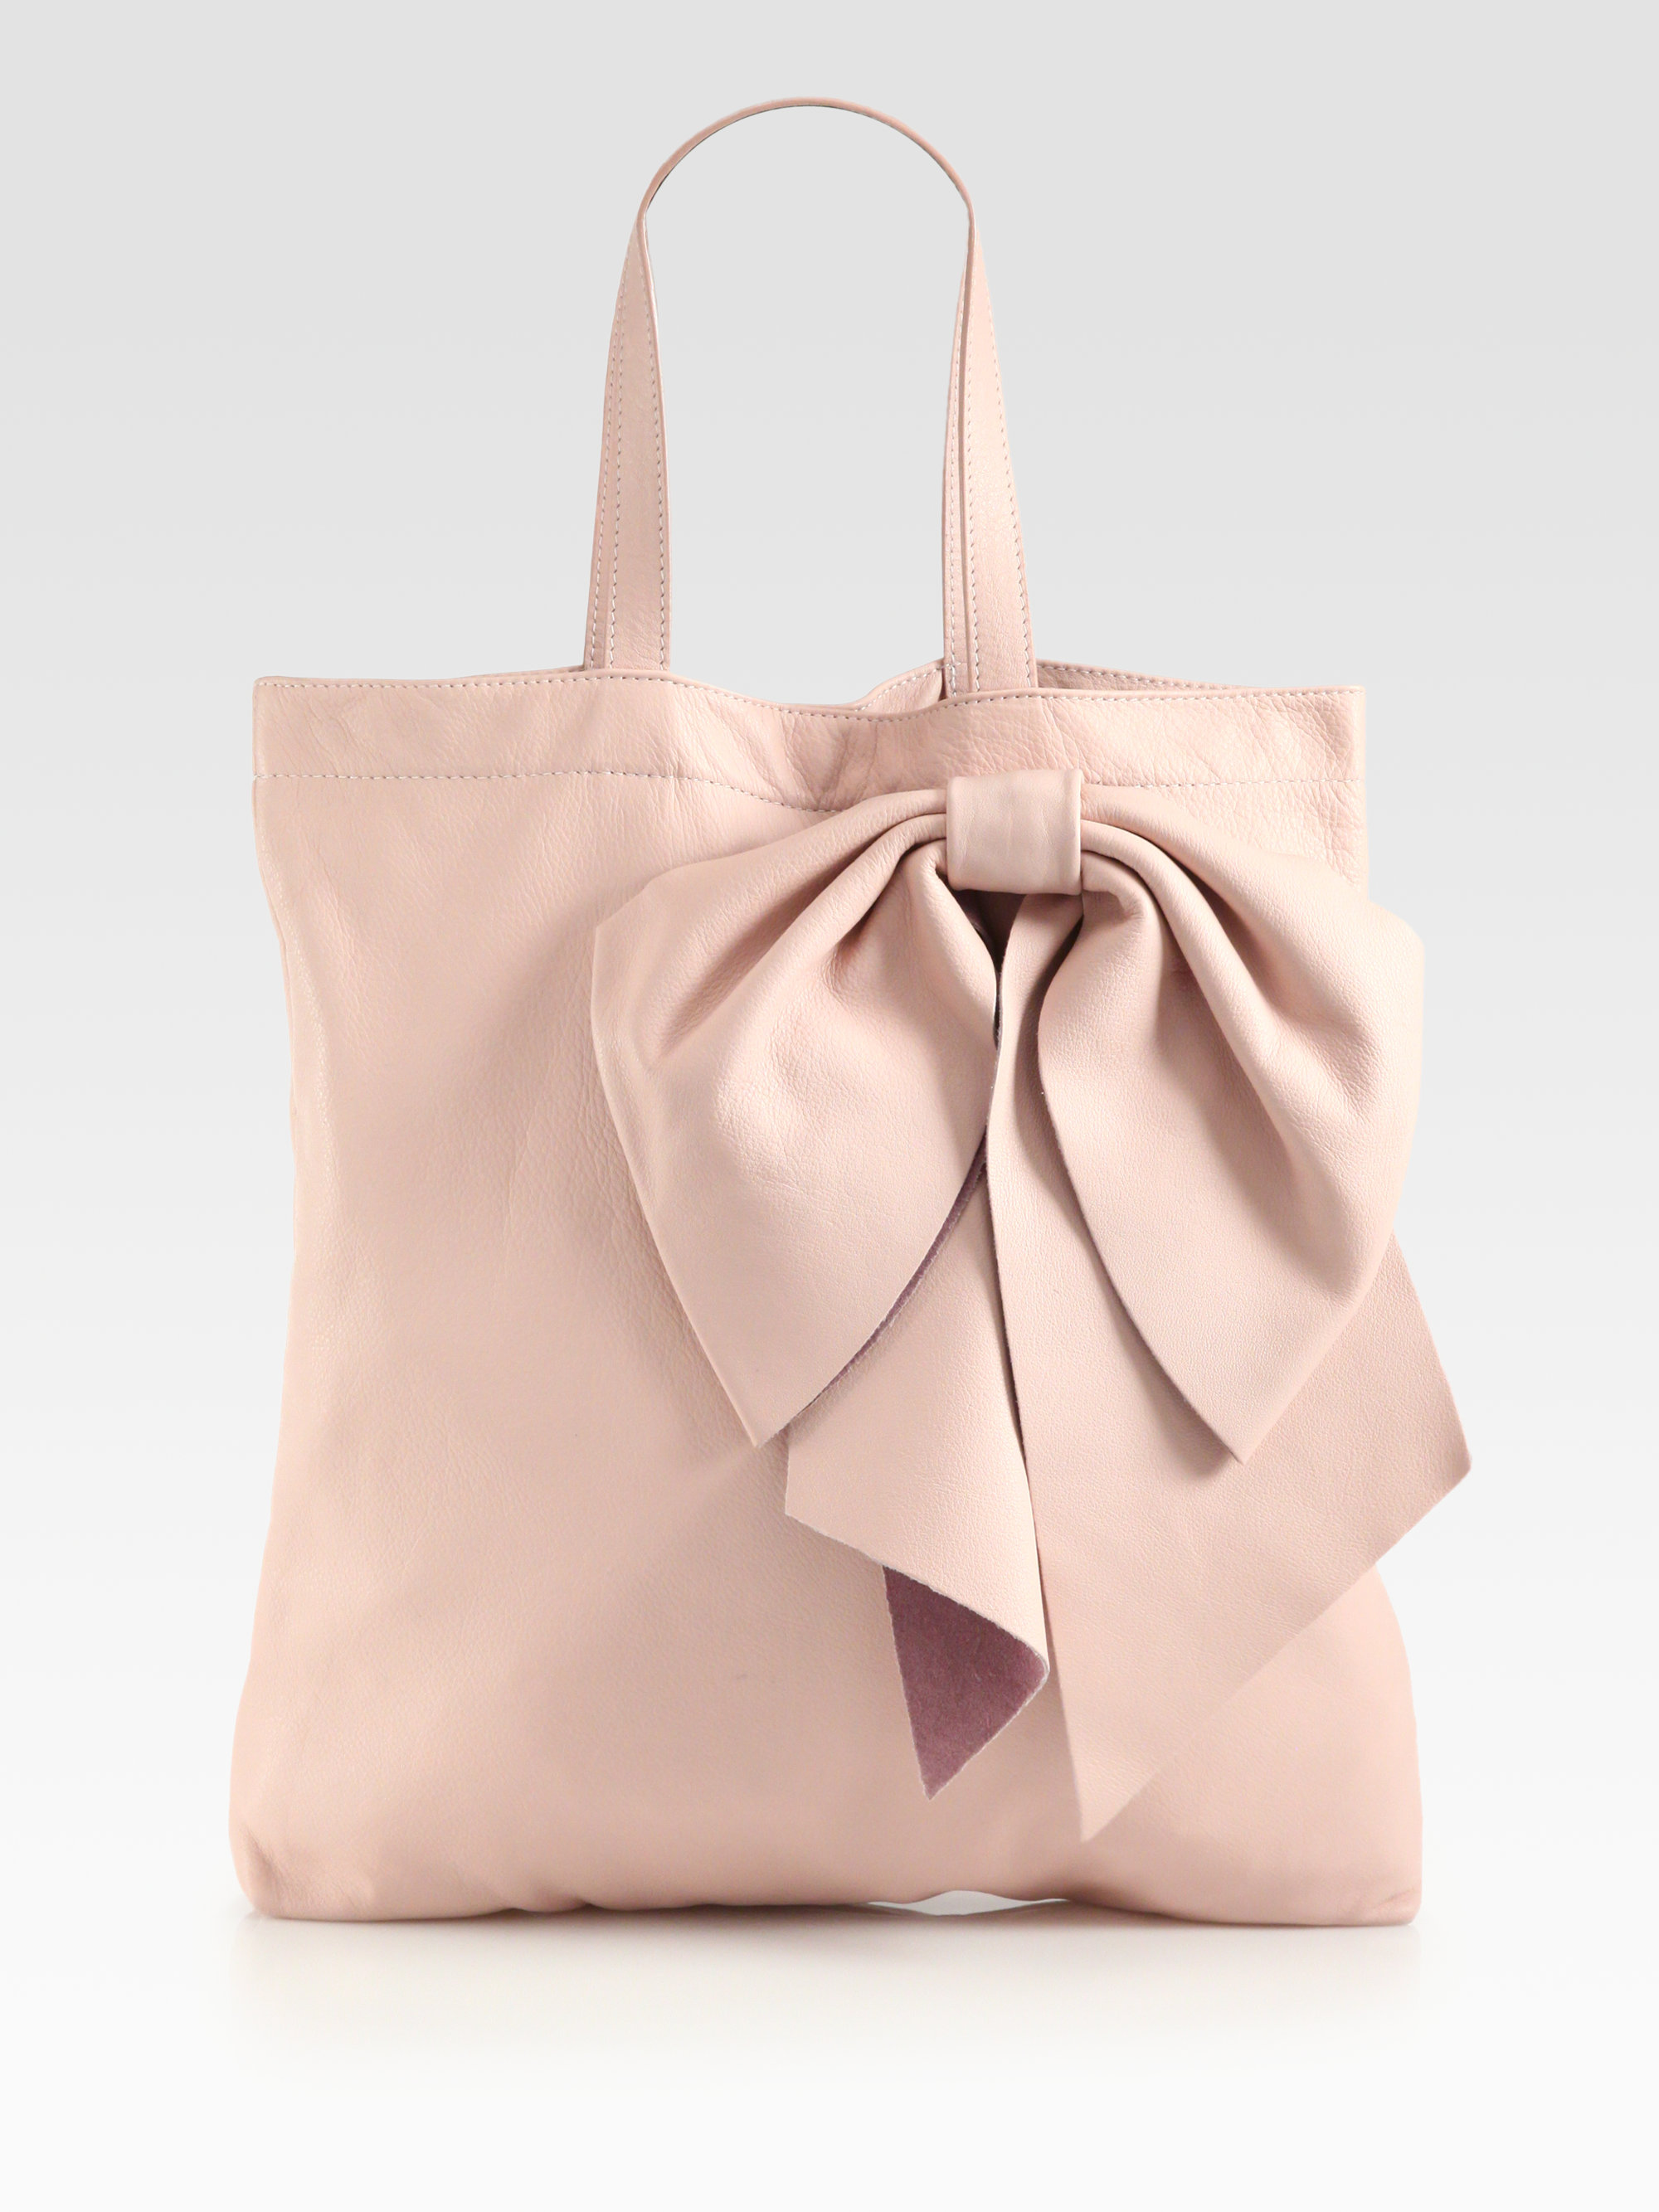 RED Valentino Bow Tote in Pink - Lyst